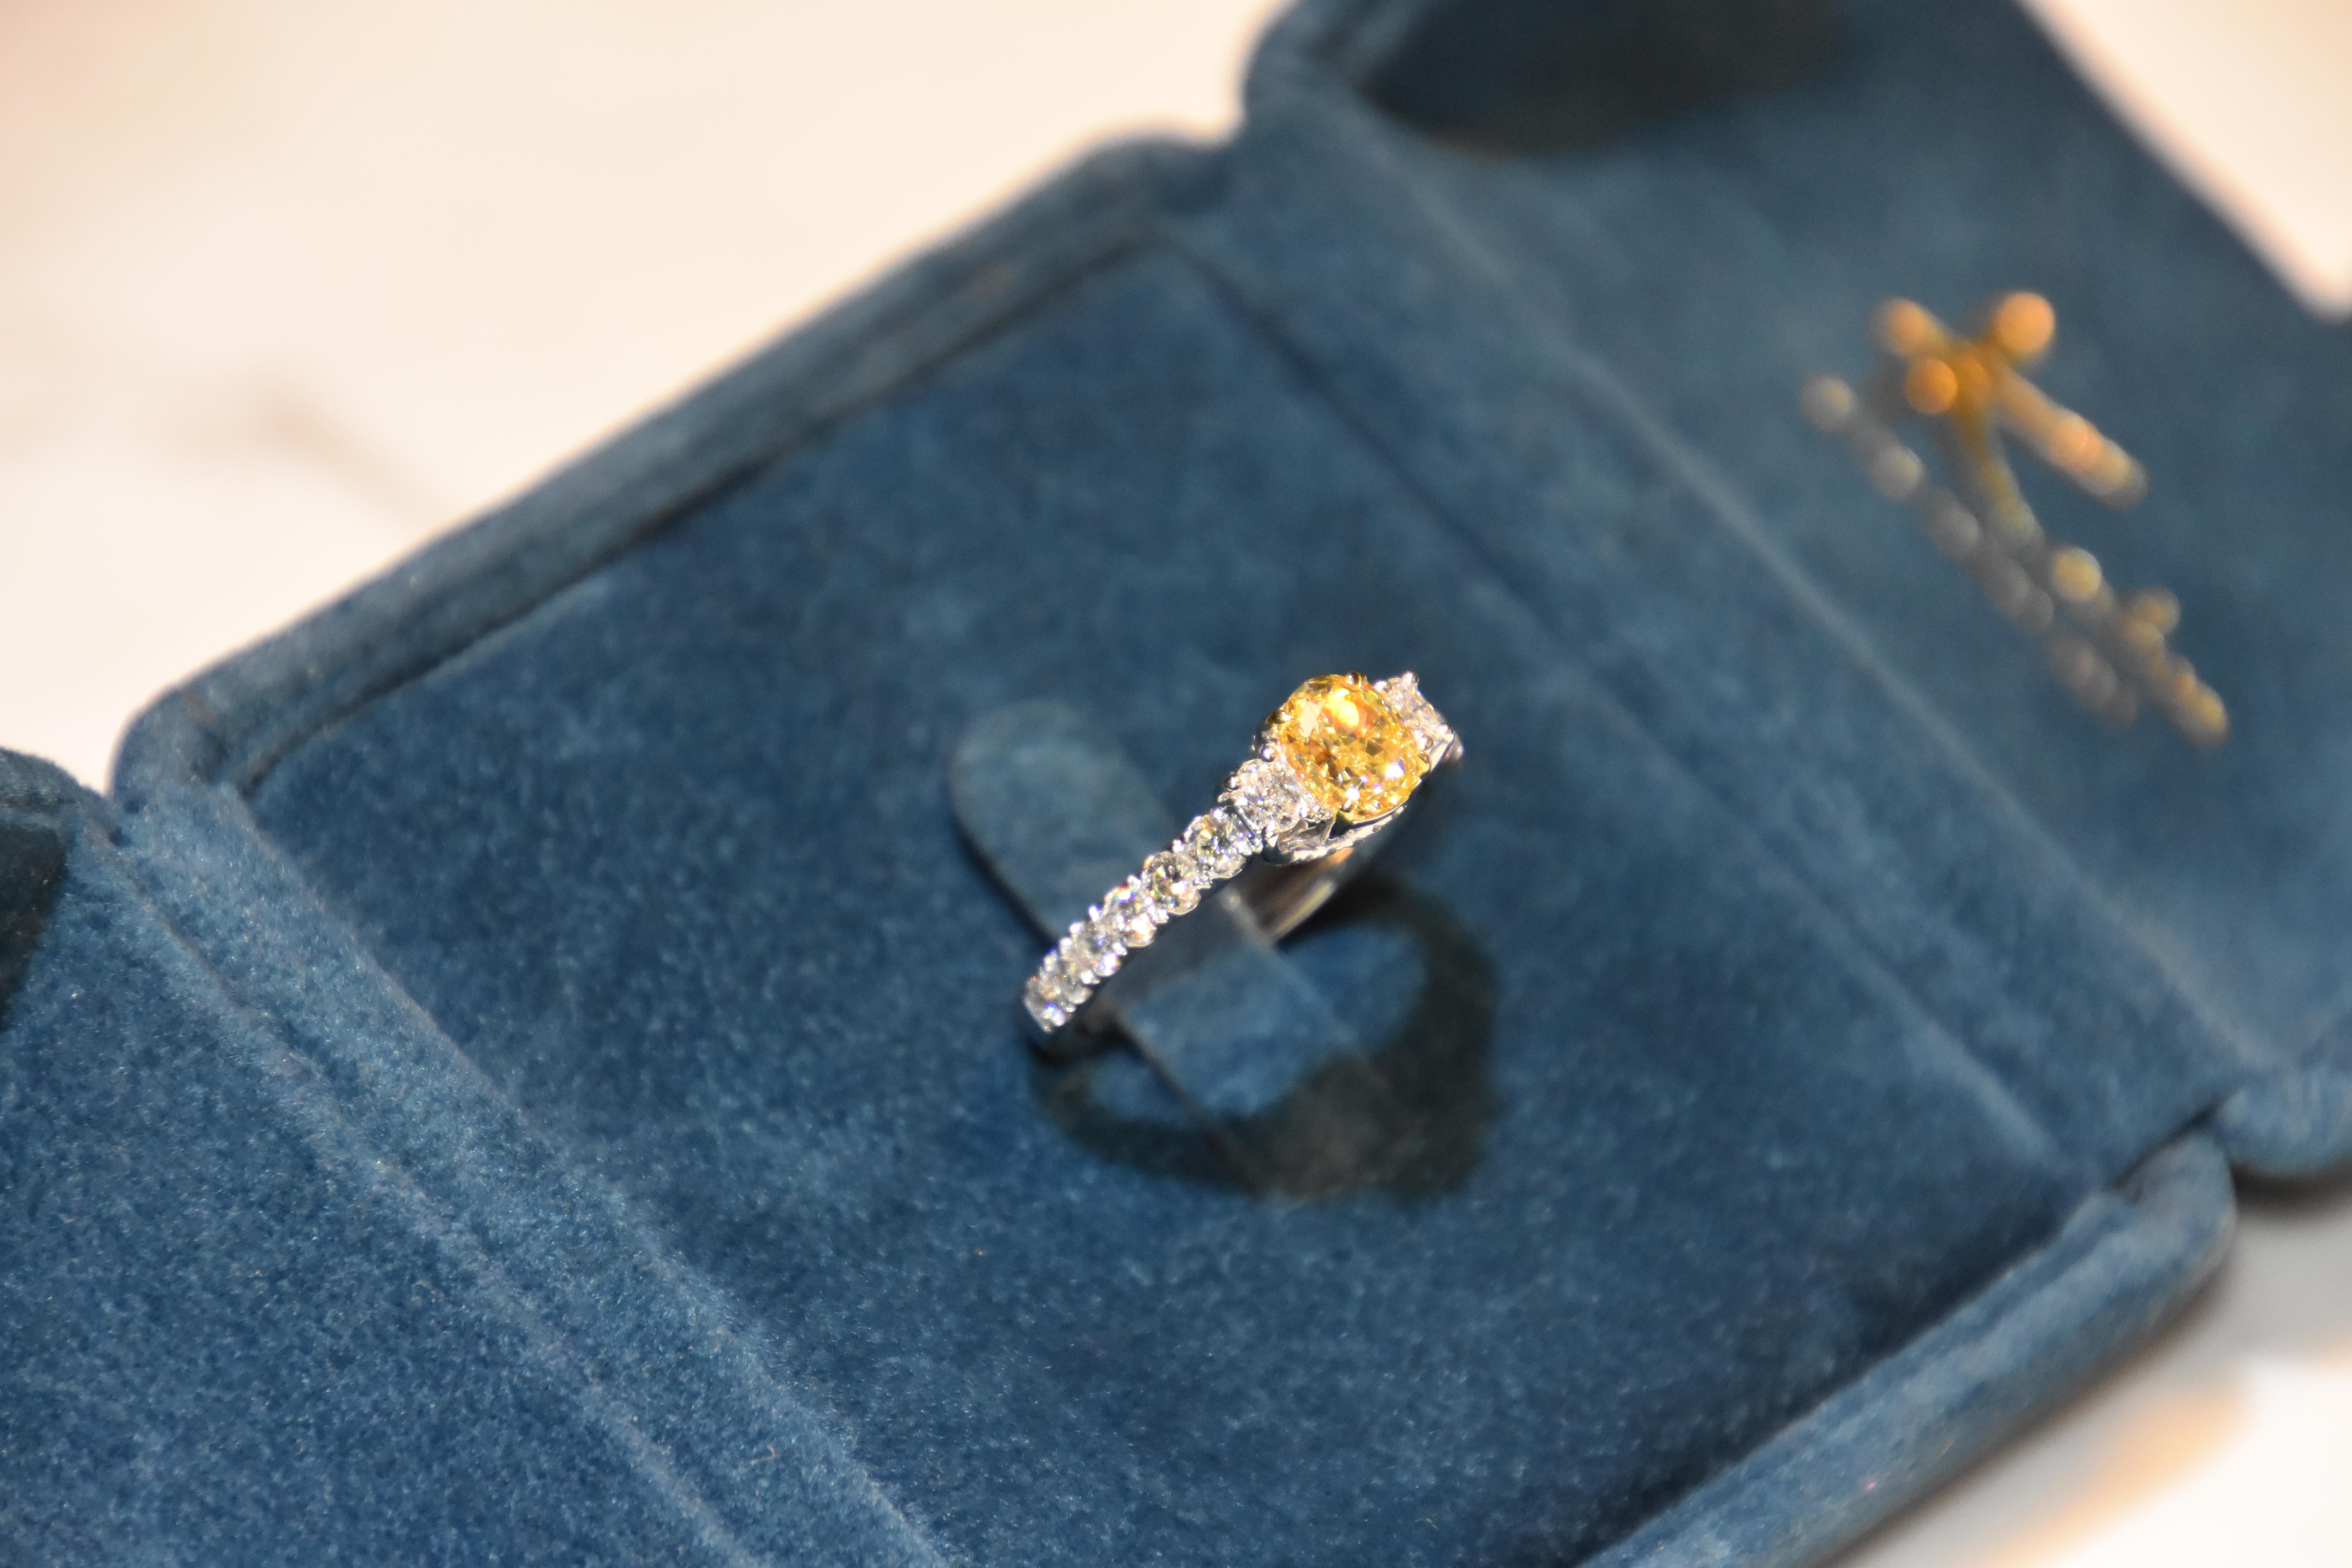 Featuring a 1.03 carat Fancy Yellow diamond with 2 pieces oval diamond on the side, simple elegant as a 3 stone ring. Shank finished with white diamond in white gold. 

Center stone certified by world wide known GIA institution. (1168362478) 

Ring